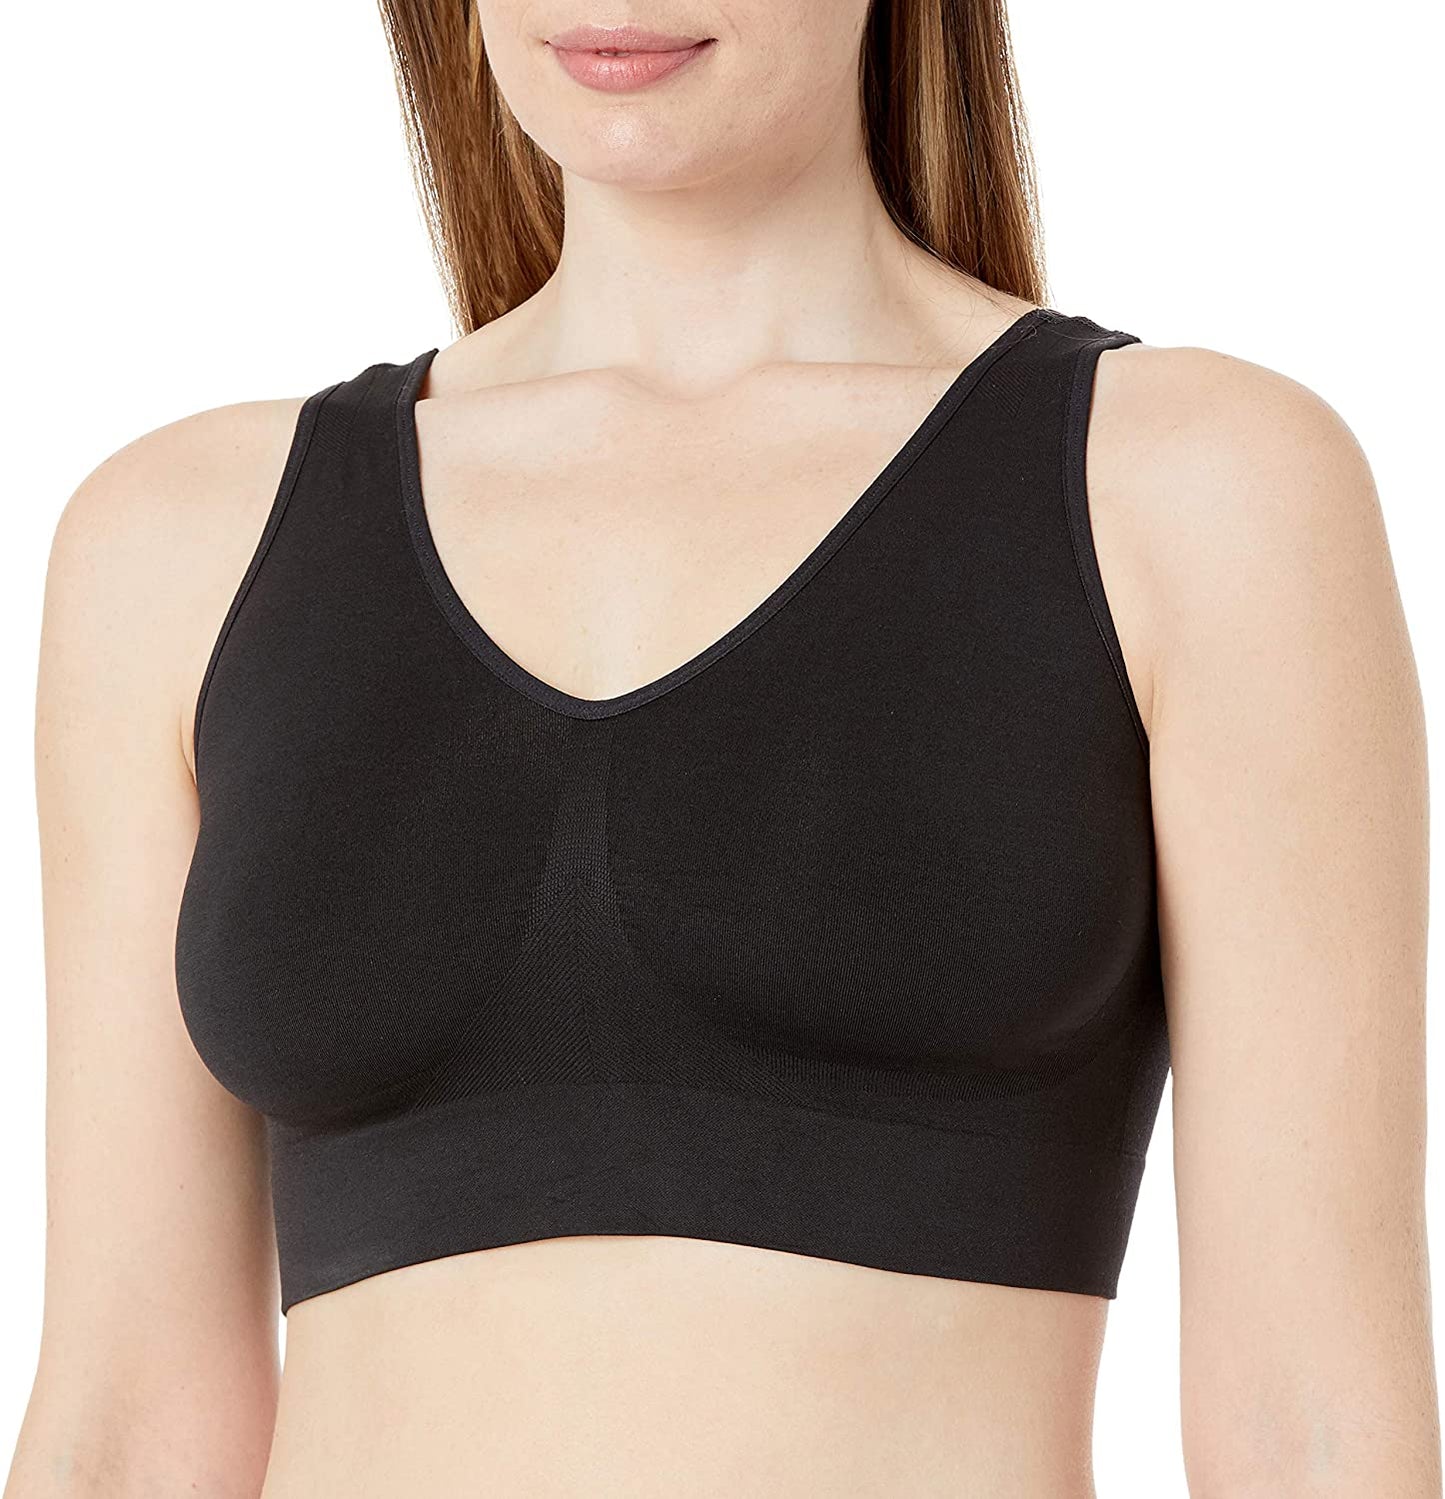 Pure Comfort Seamless Wirefree Bra with Moisture Control (1263)